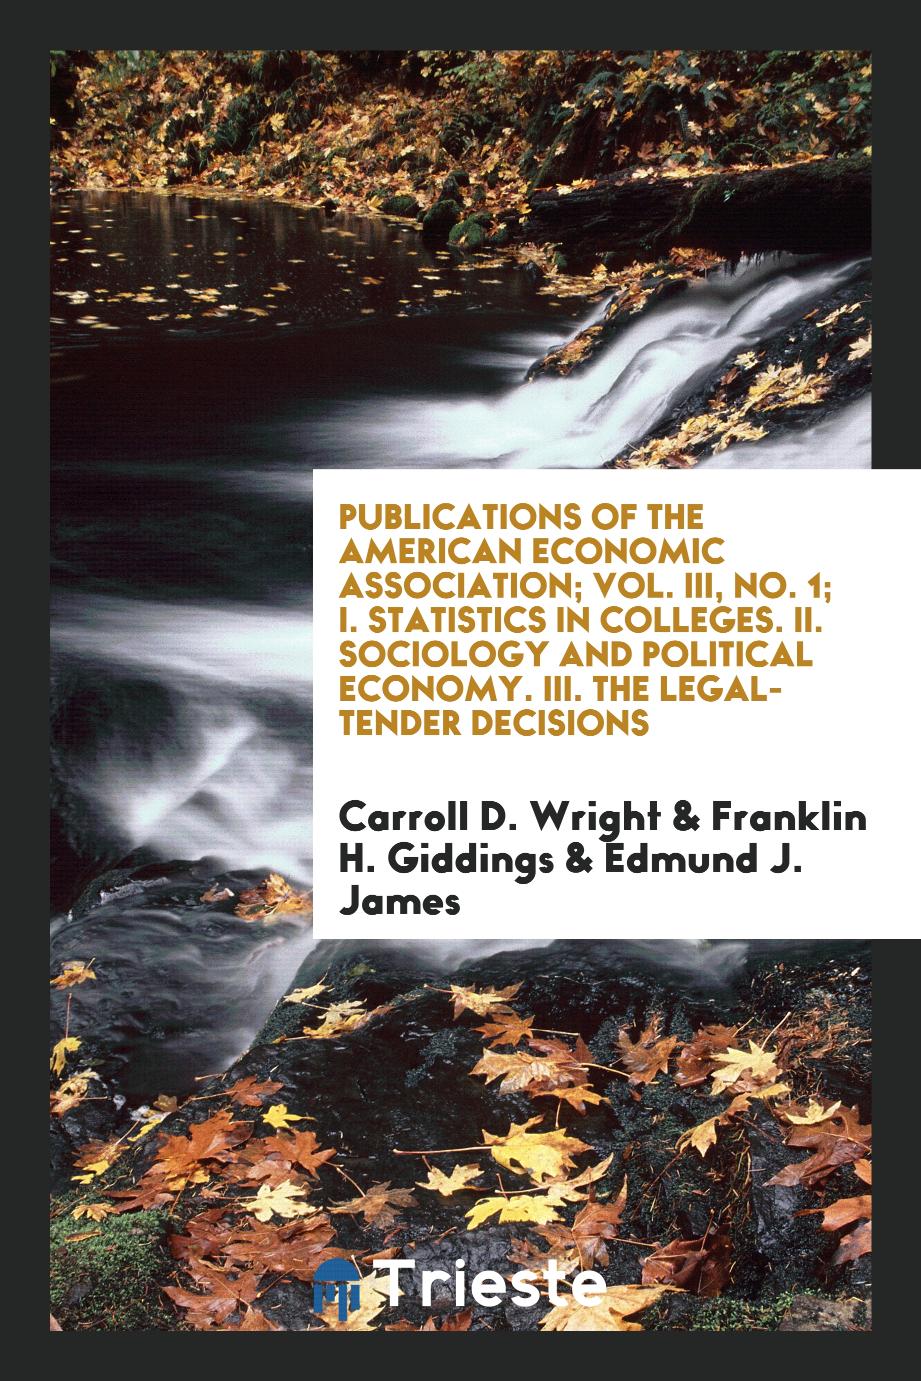 Publications of the American Economic Association; Vol. III, No. 1; I. Statistics in Colleges. II. Sociology and Political Economy. III. The Legal-Tender Decisions